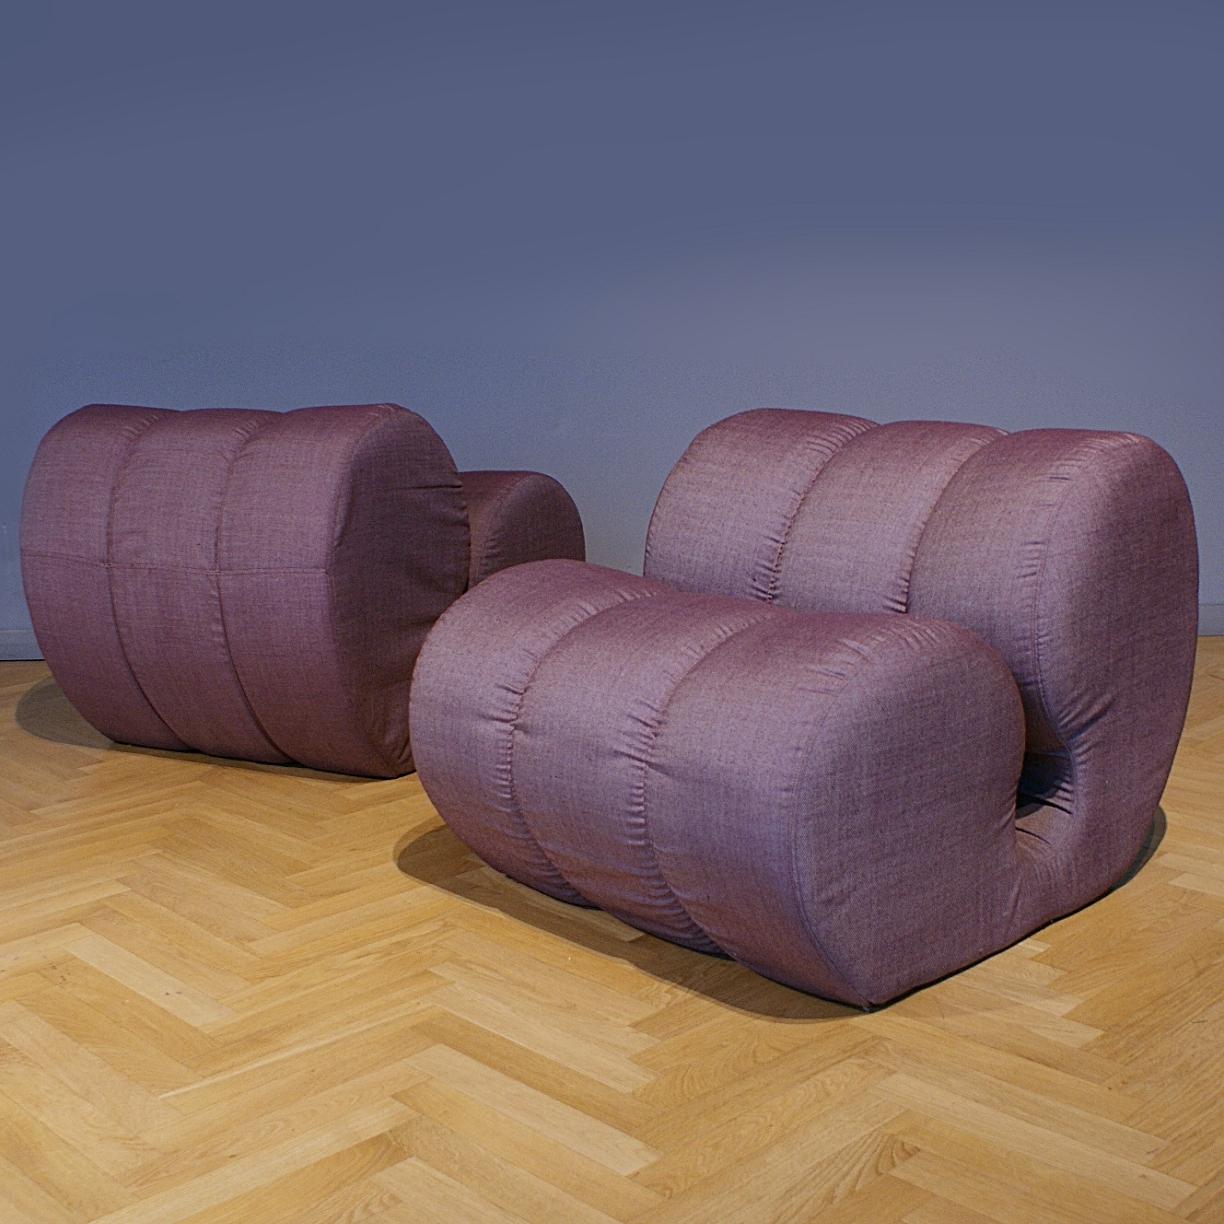 Extraordinary Space Age Italian lounge chairs in the style of Mario Bellini. The frame of the chairs is covered with a rounded soft foam and upholstered with very fine Italian fabric. We love the versatility and endless combination possibilities of